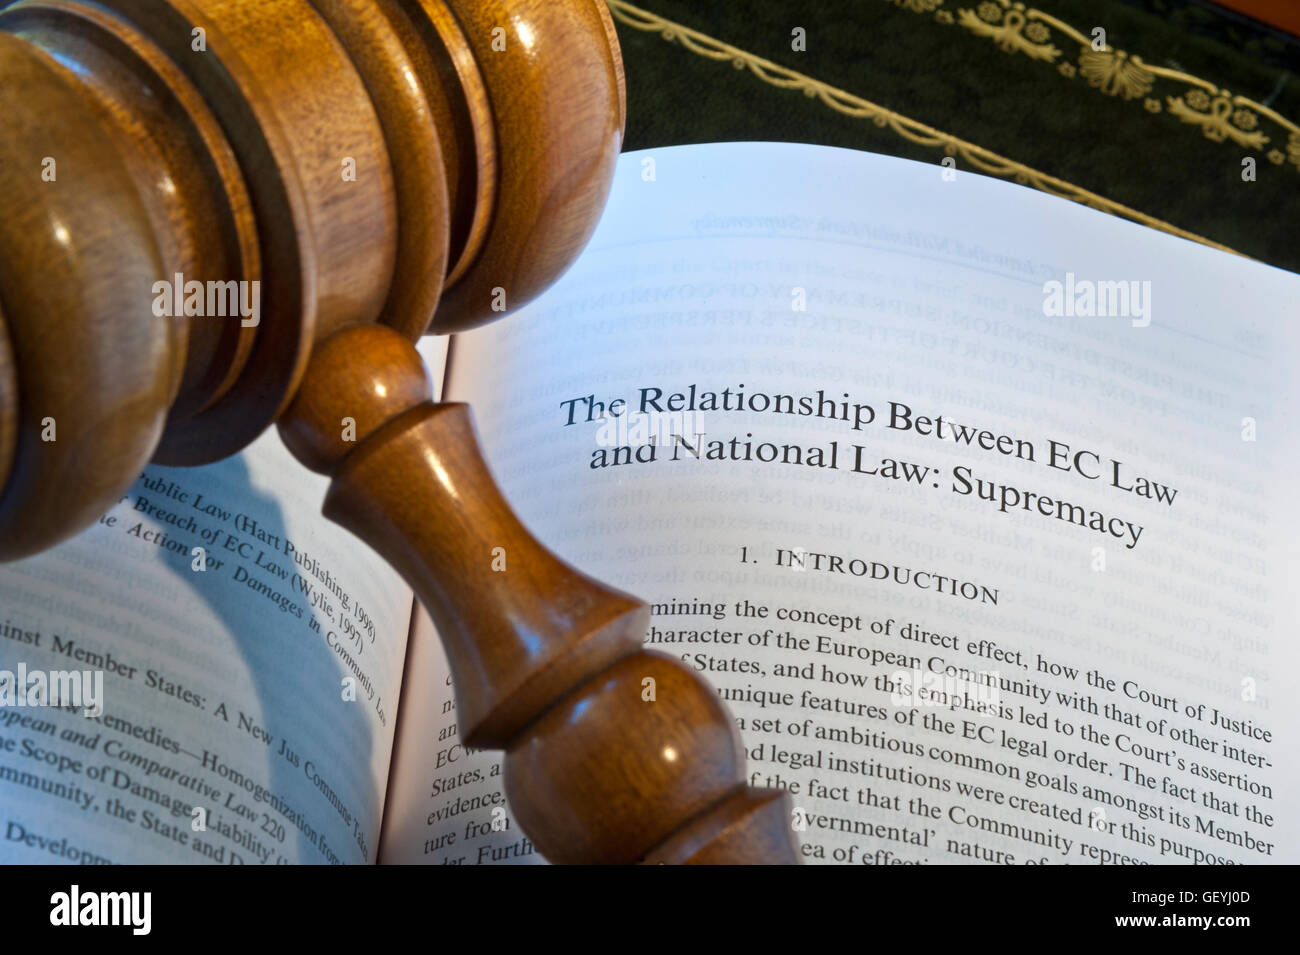 BREXIT EU LAW Concept image of EU reference Law laws book on desk with judges gavel on page reference to EC Law & National Law-Supremacy Stock Photo